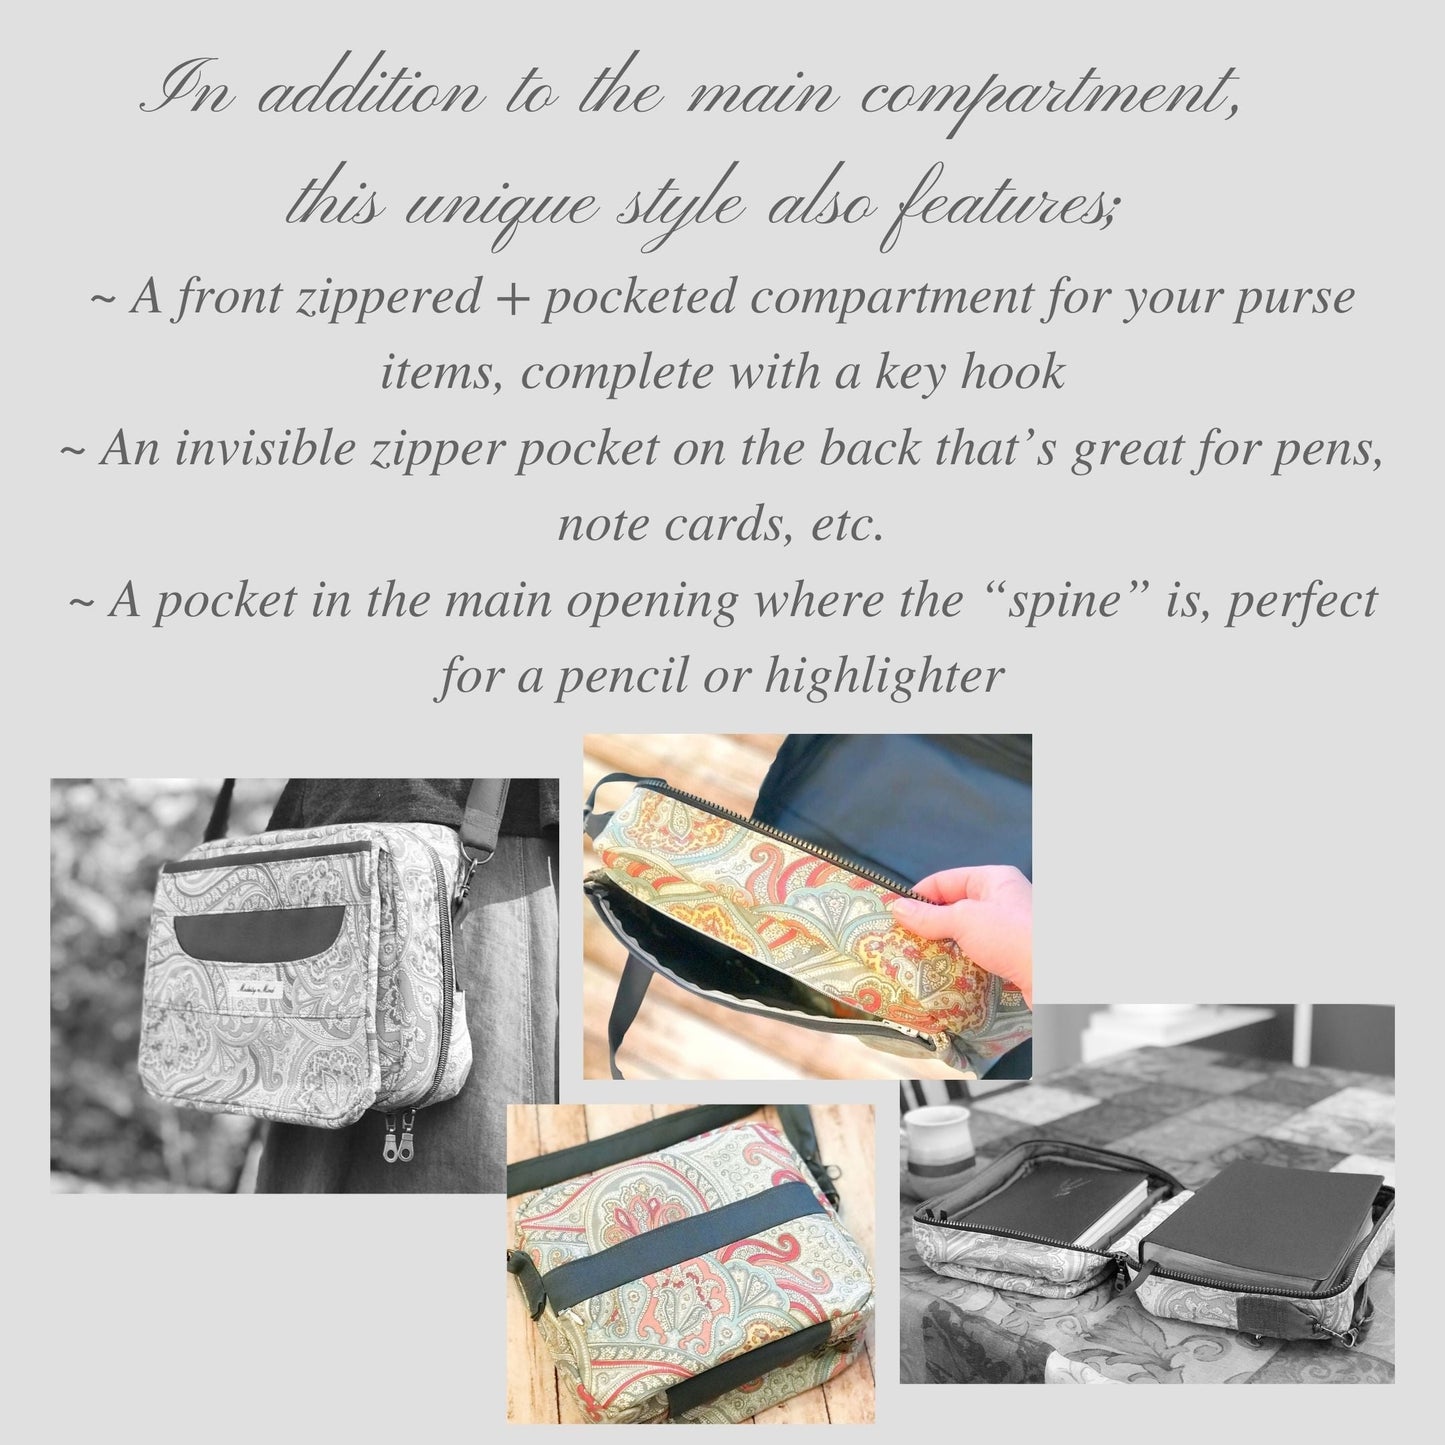 Graphic showing some of the bag's features: In addition to the main compartment, this unique style also features a front zippered compartment, and invisible zipper pocket, and a pocket on the spine of the bag